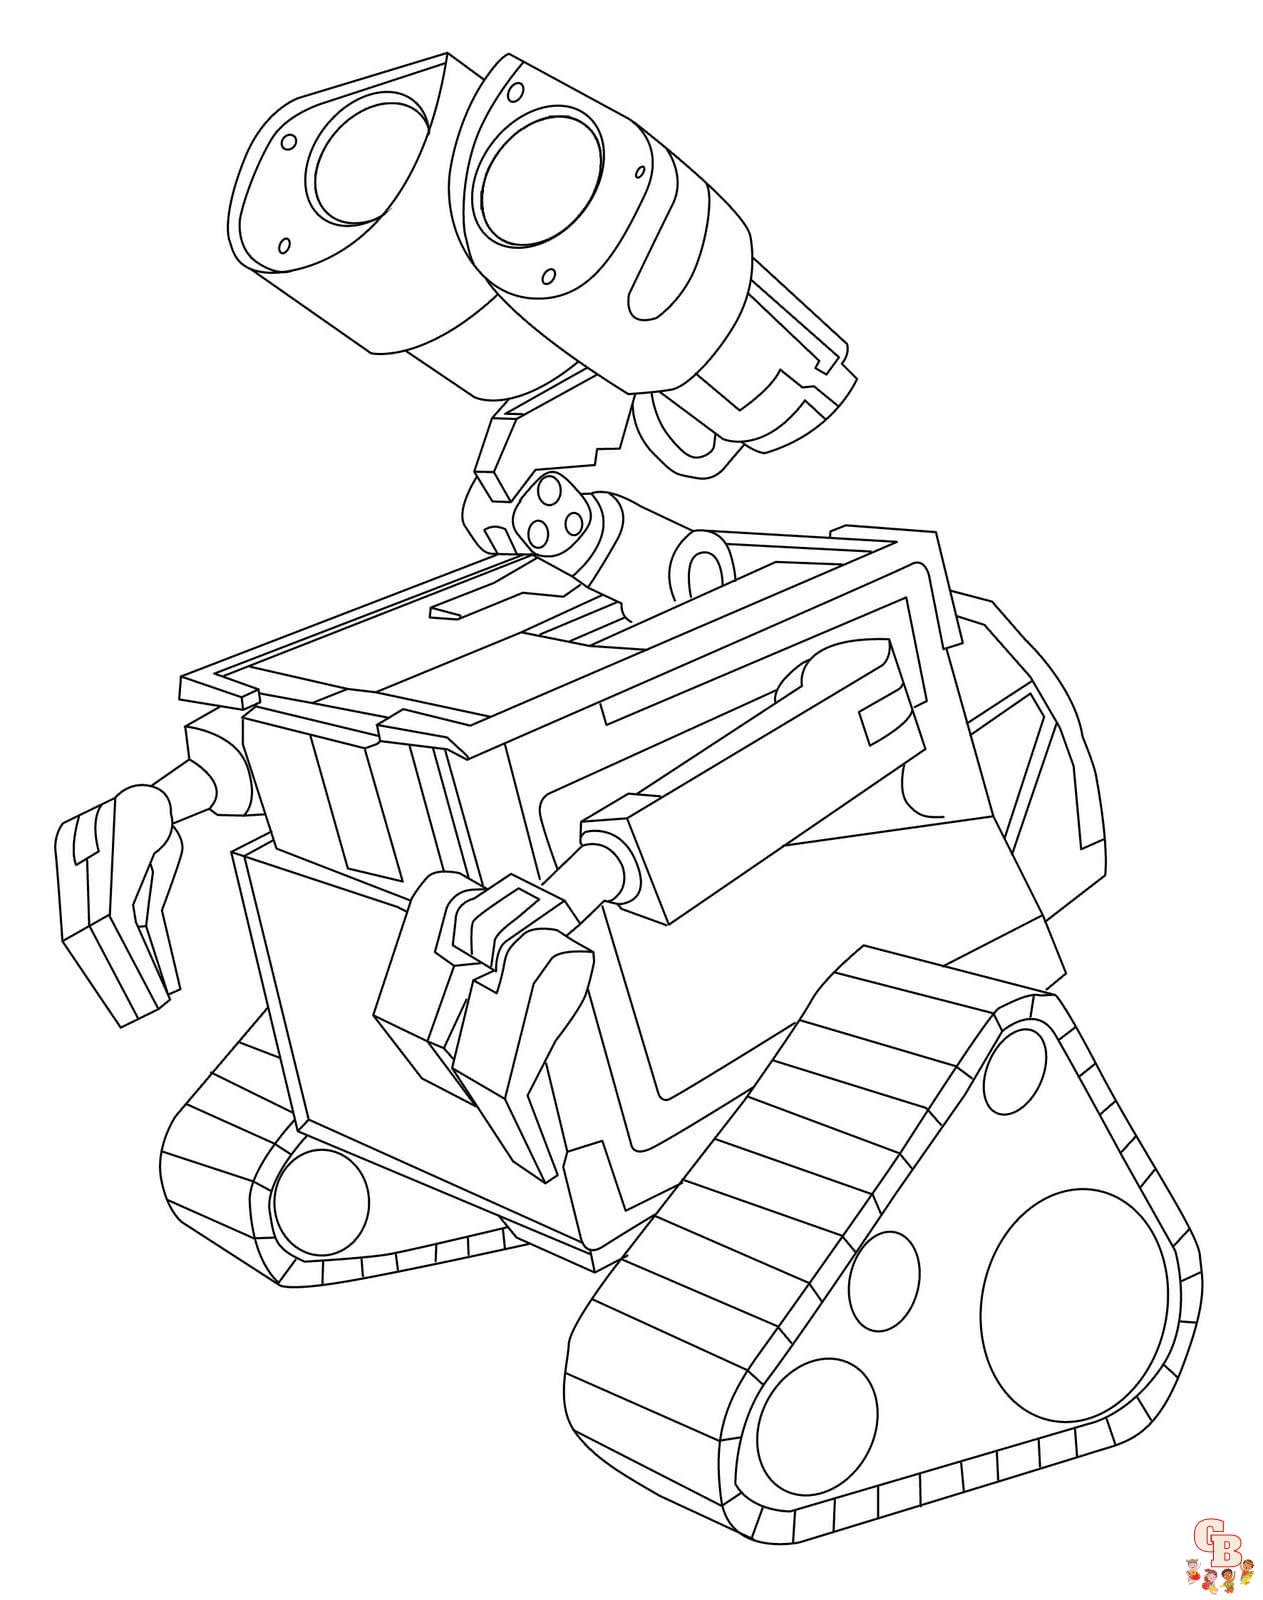 Wall E coloring pages free